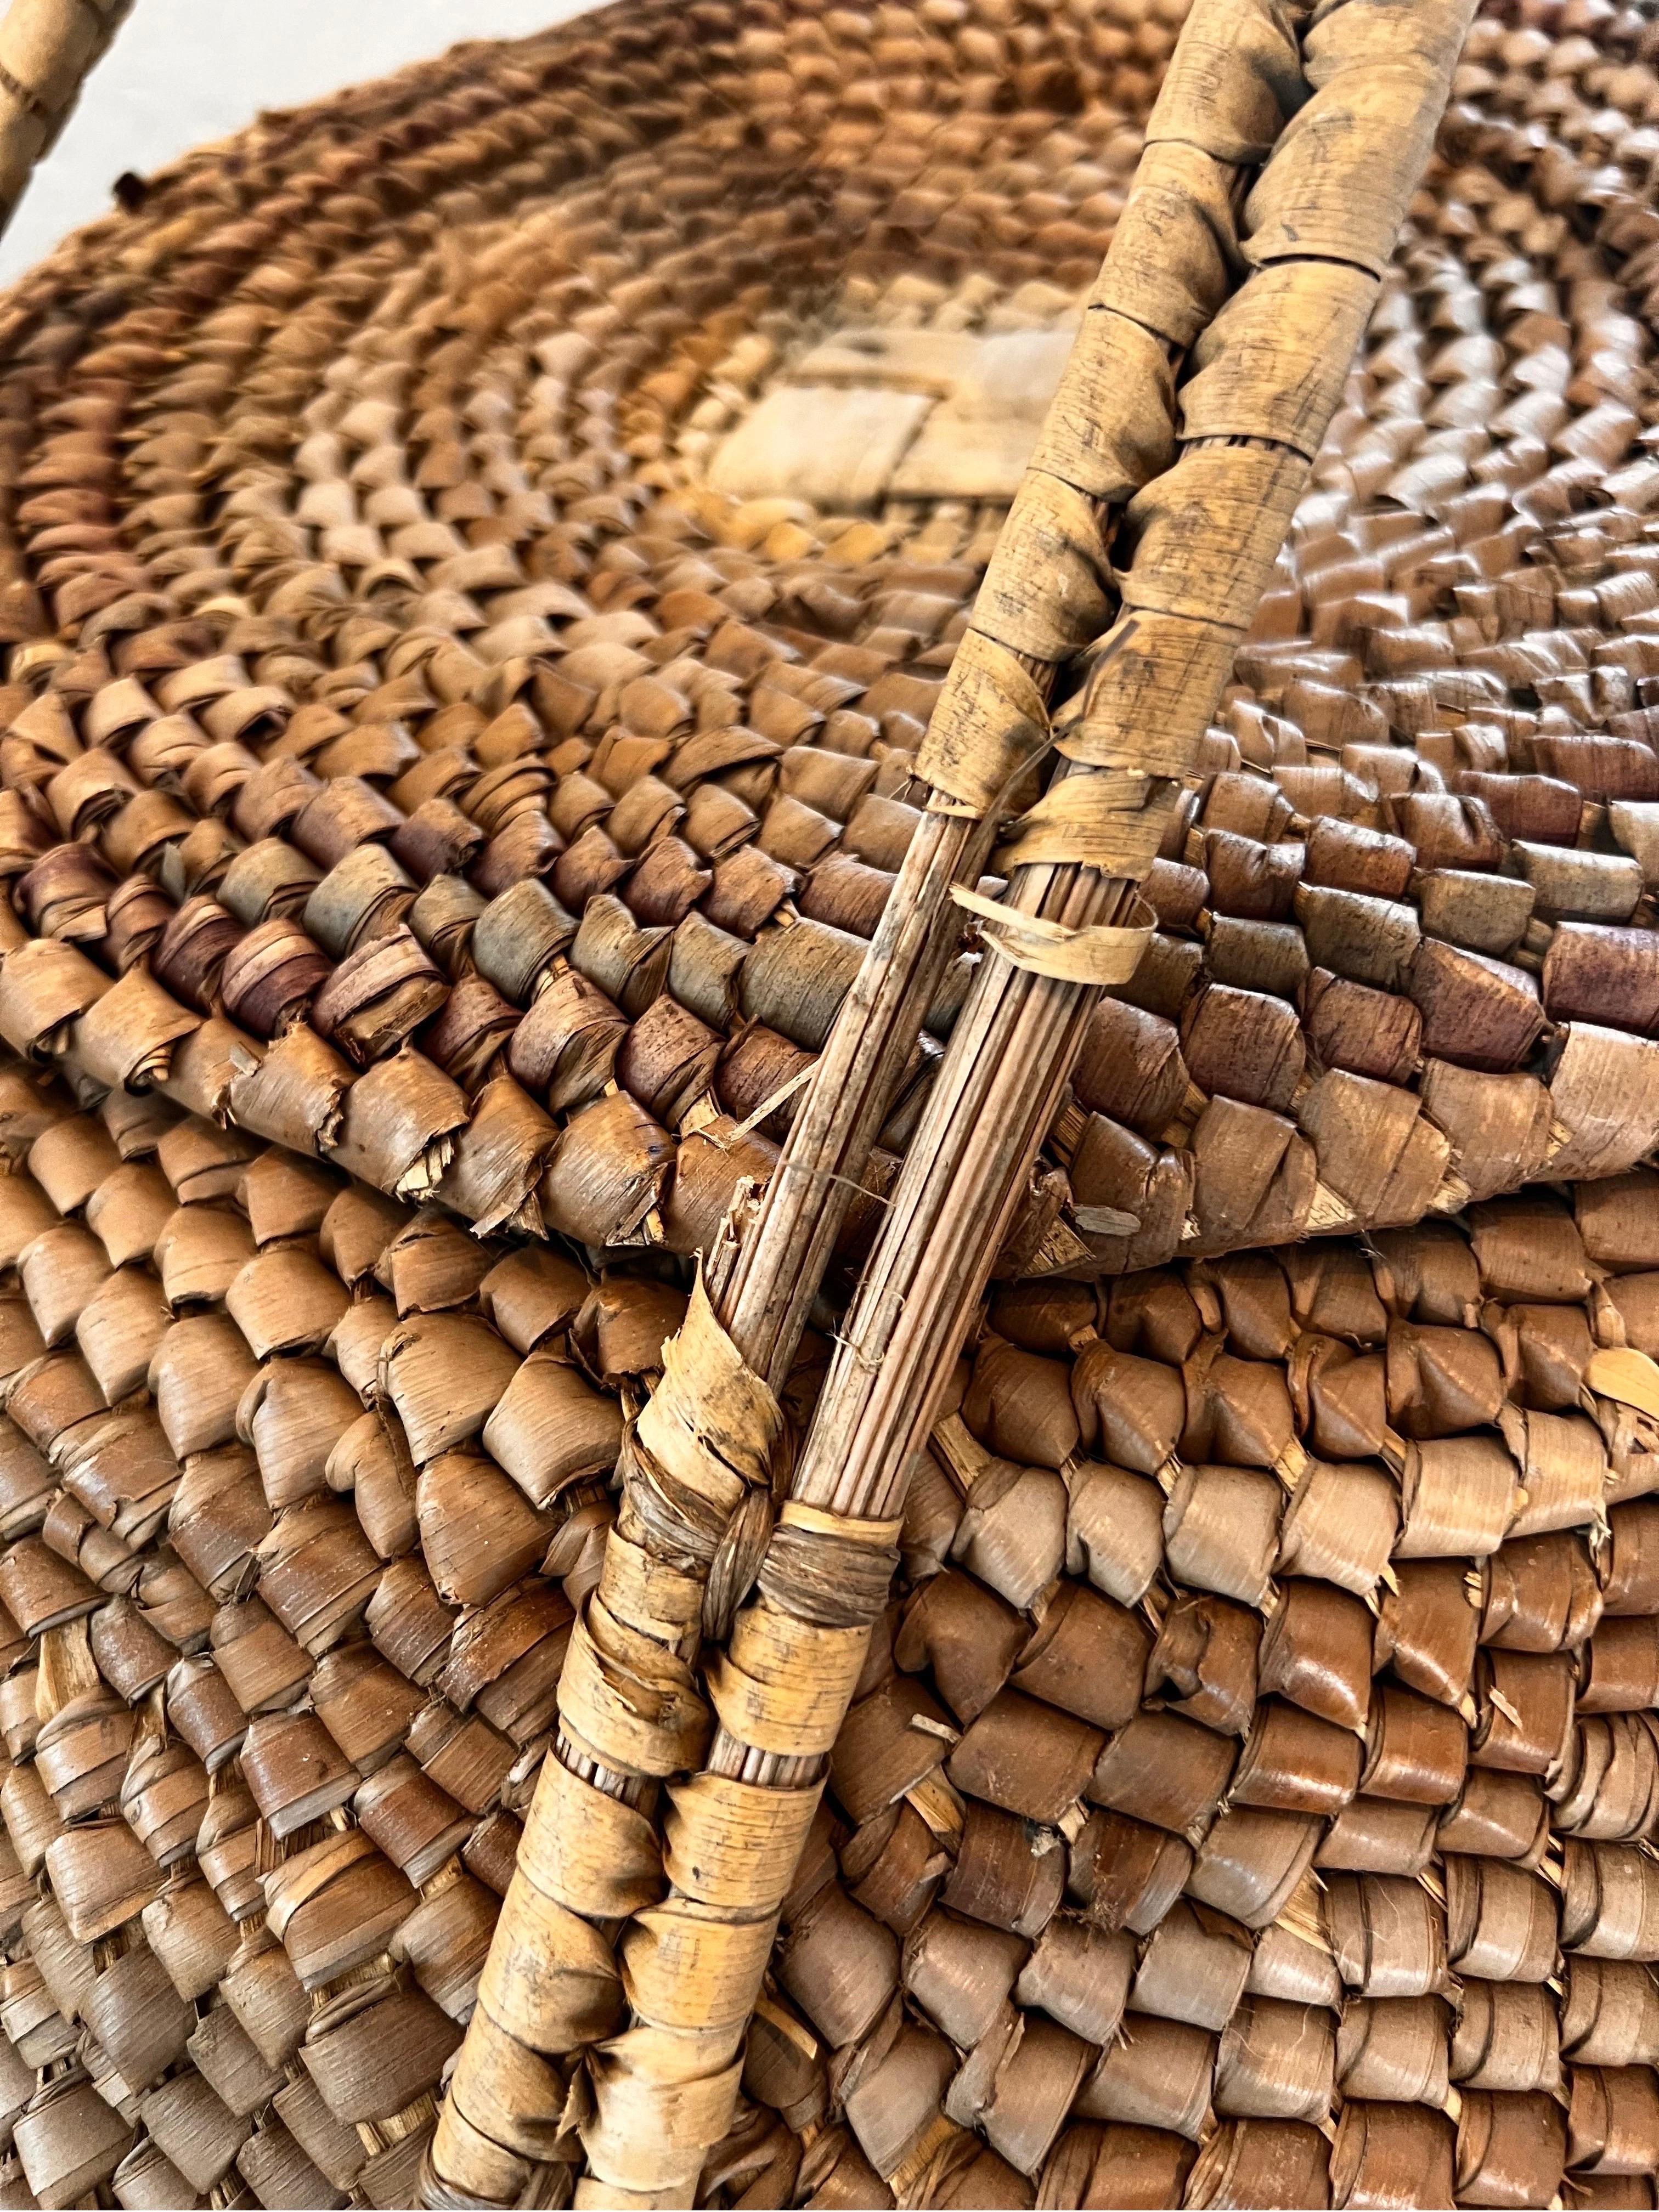 The Massive Mid 20th Century Basket was part of a collection of baskets found in the original basket weaving community where it was originally woven. The pieces had been woven by a weaving group who stored the pieces in a warehouse and left them,